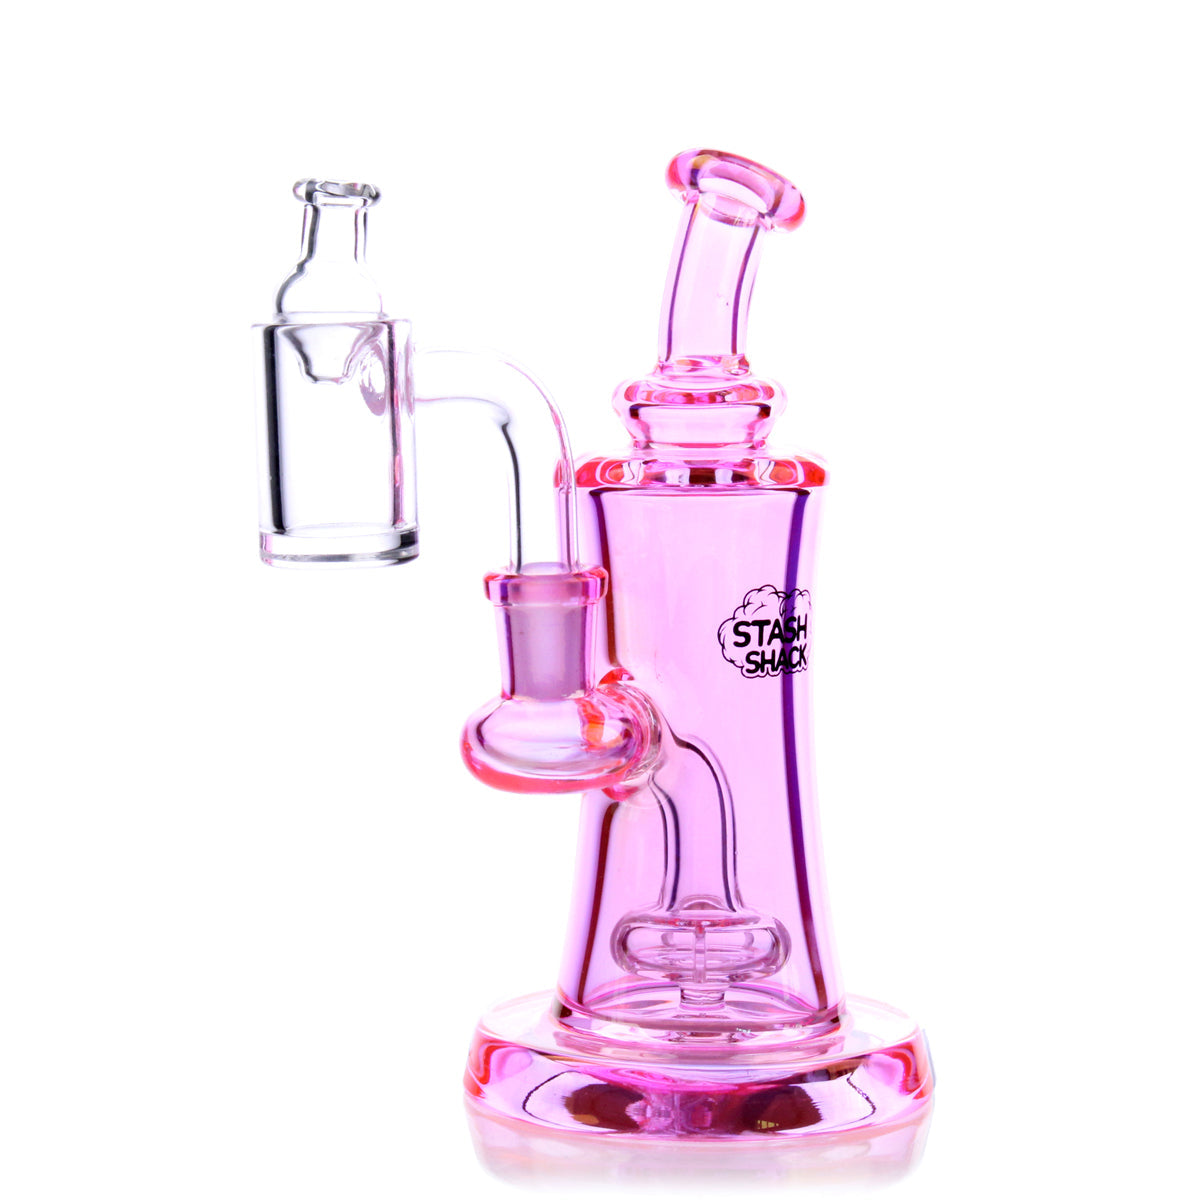 Elysian Mini Rig in Pink - Compact 5.5" Dab Rig with 90 Degree Banger Hanger, Front View